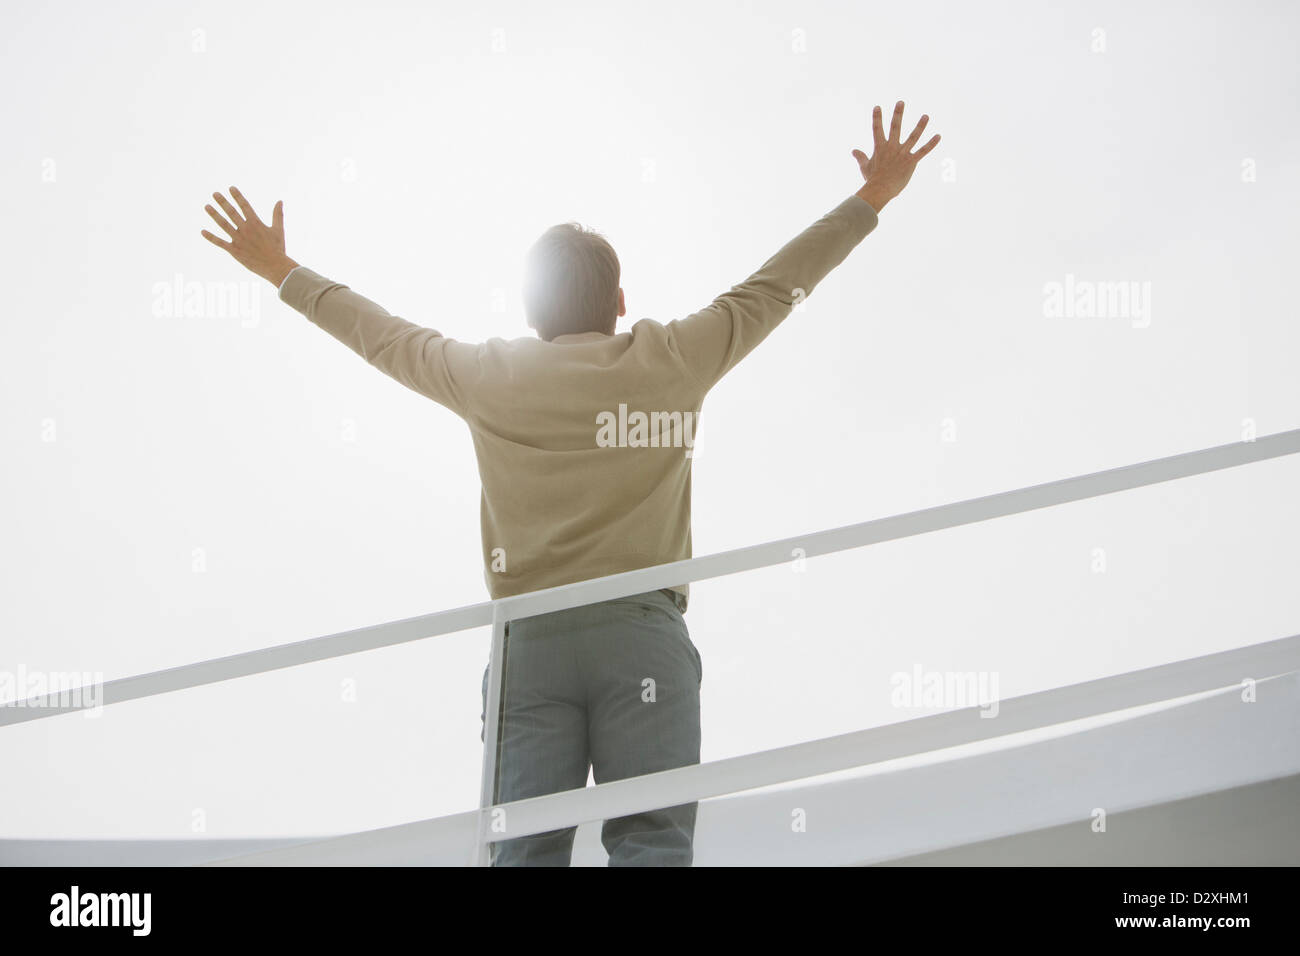 Sun shining behind businessman with arms raised Stock Photo